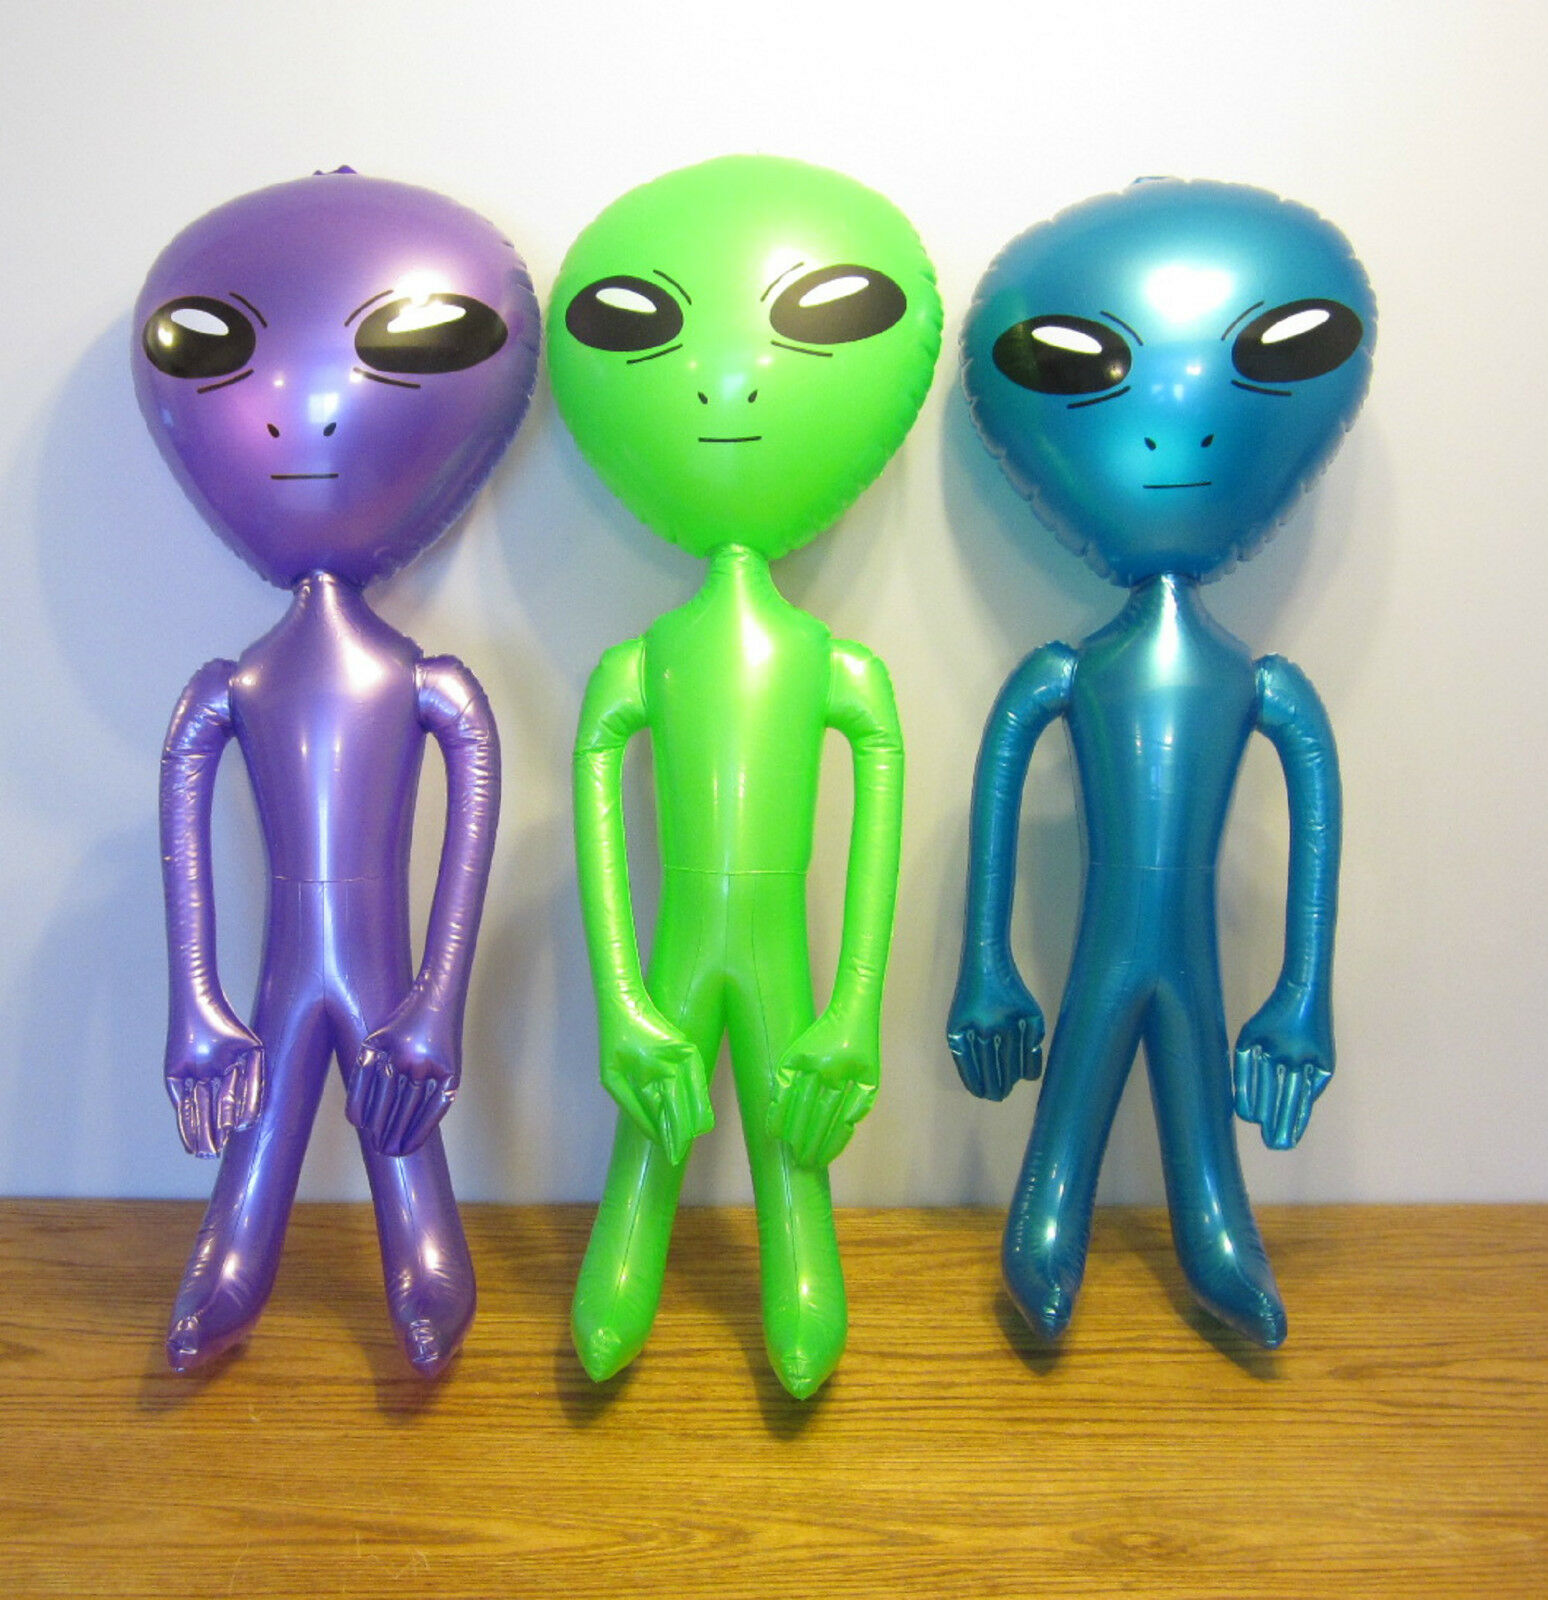 3 New Inflatable Aliens Green Purple & Blue 36" Blow Up Inflate Alien Halloween